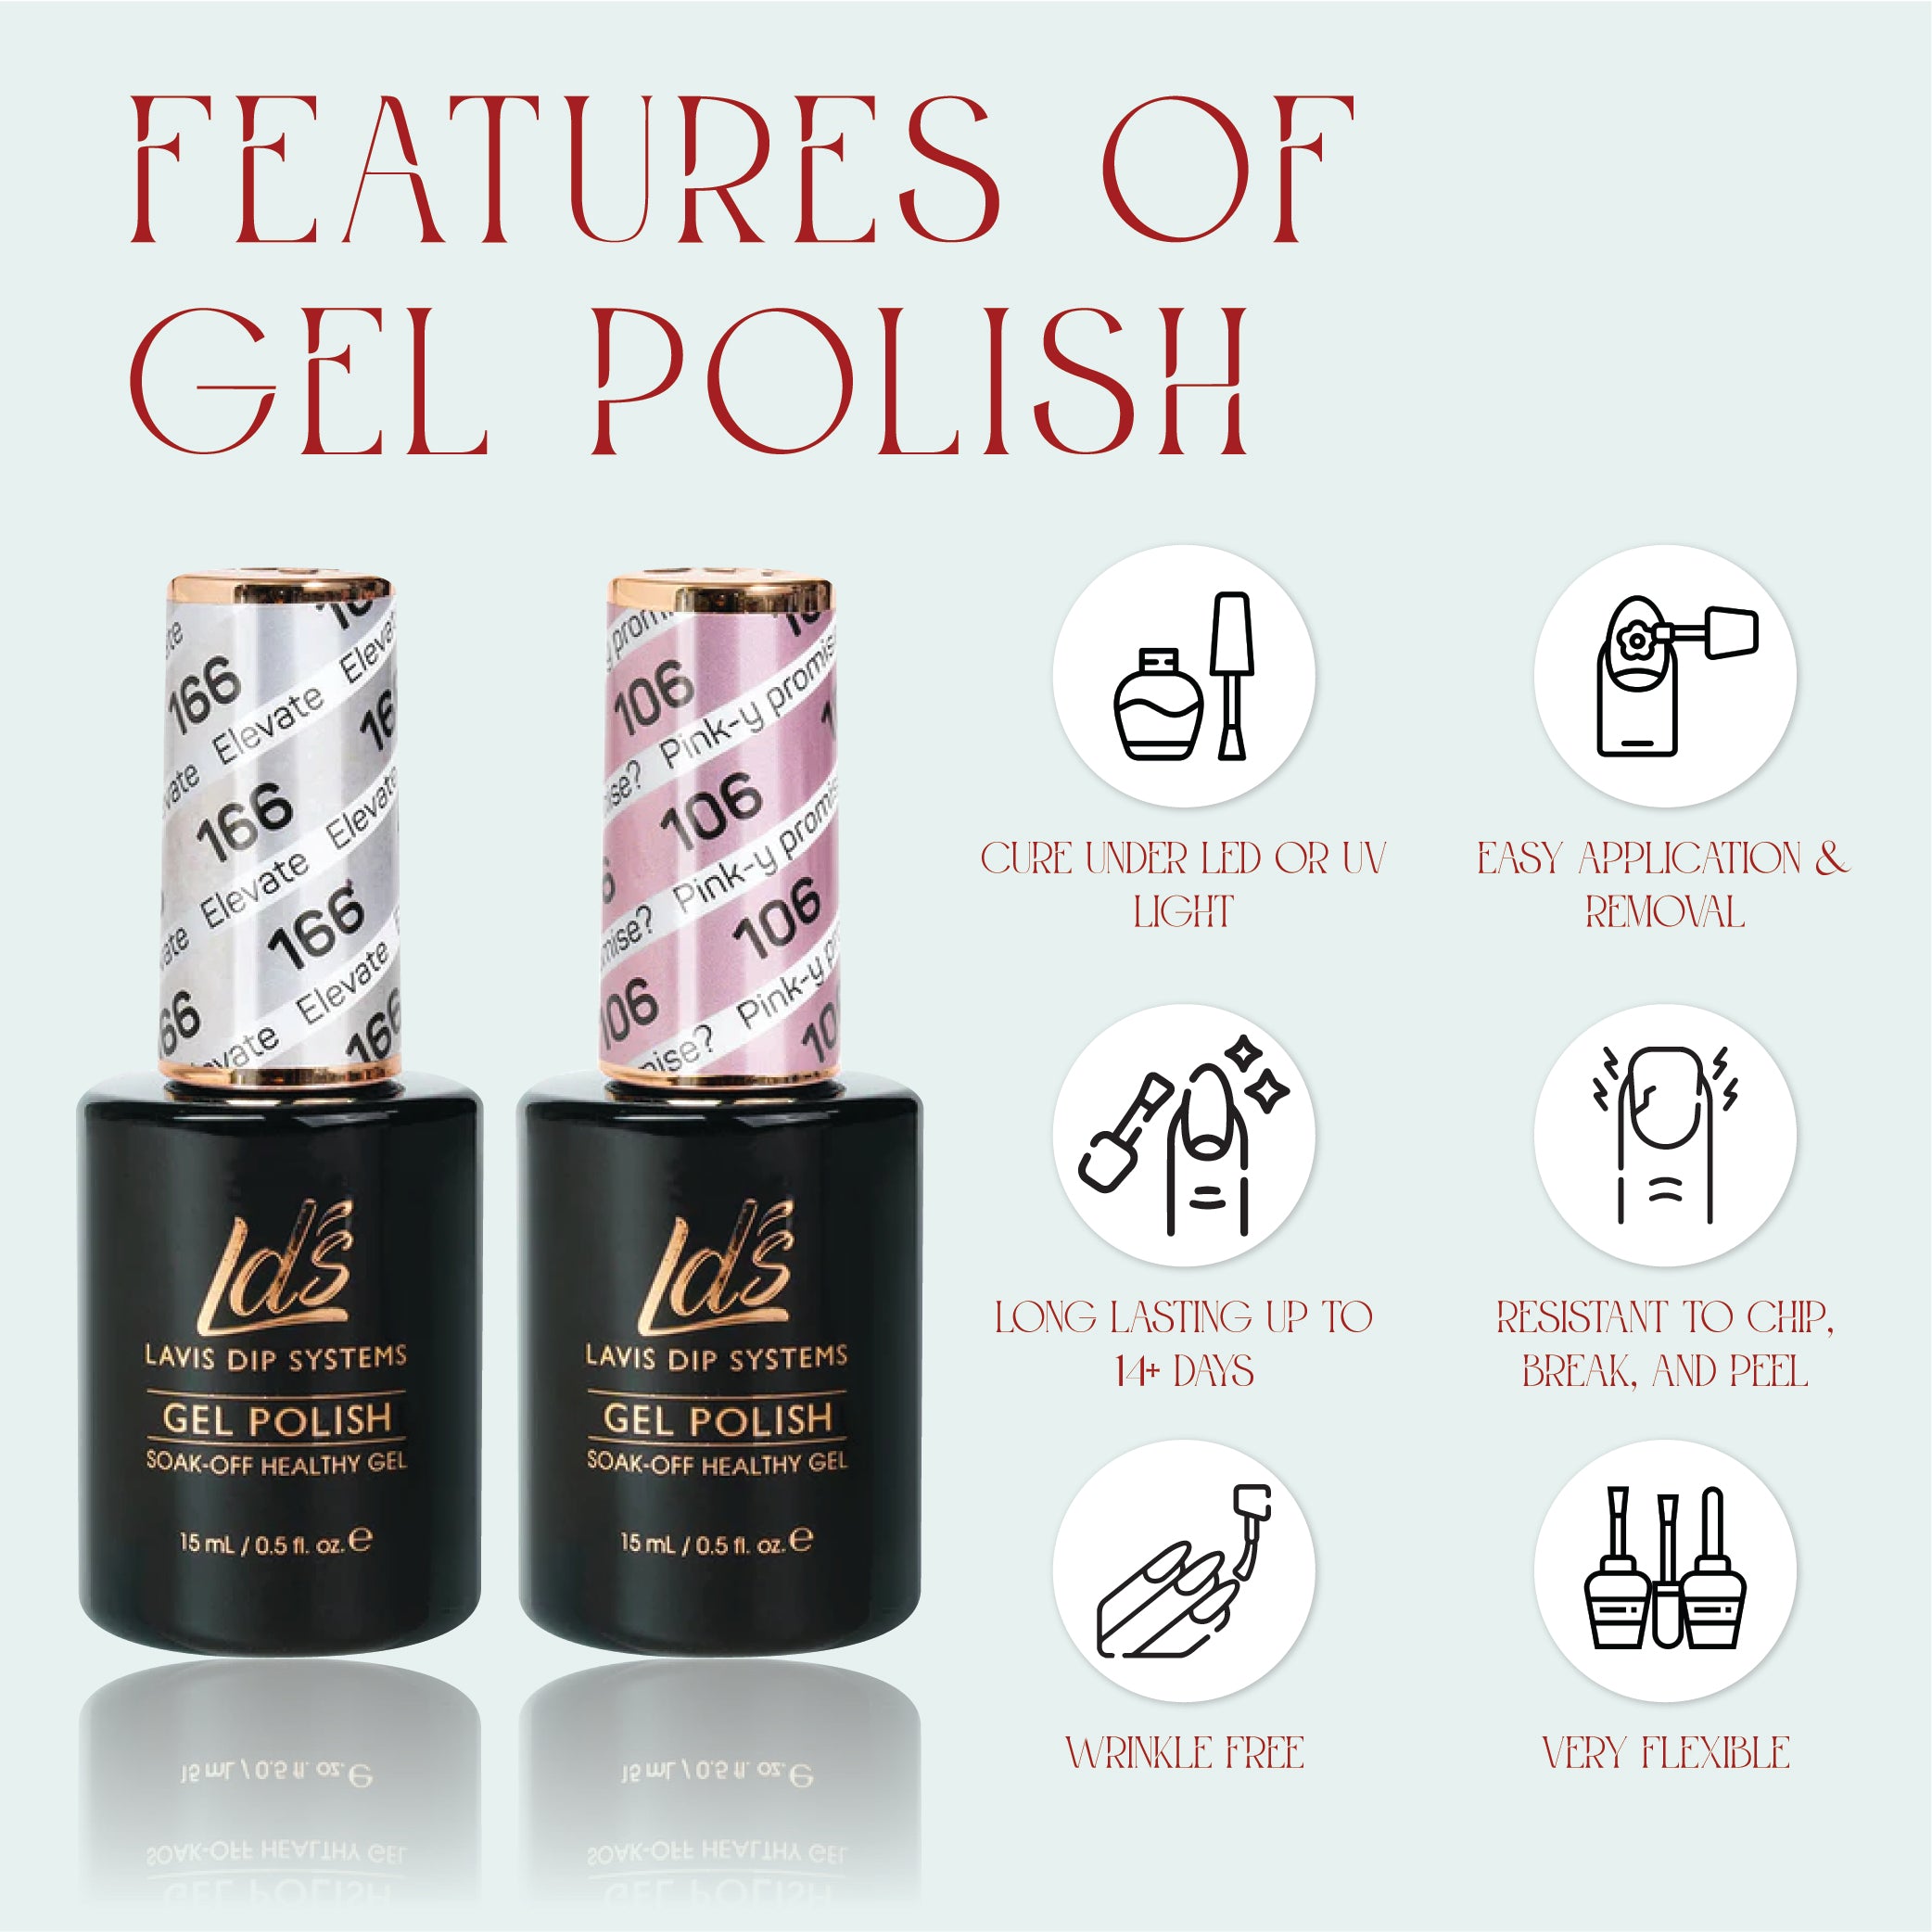 LDS 180 Blissful White - LDS Gel Polish 0.5oz - Cover Nude Collection